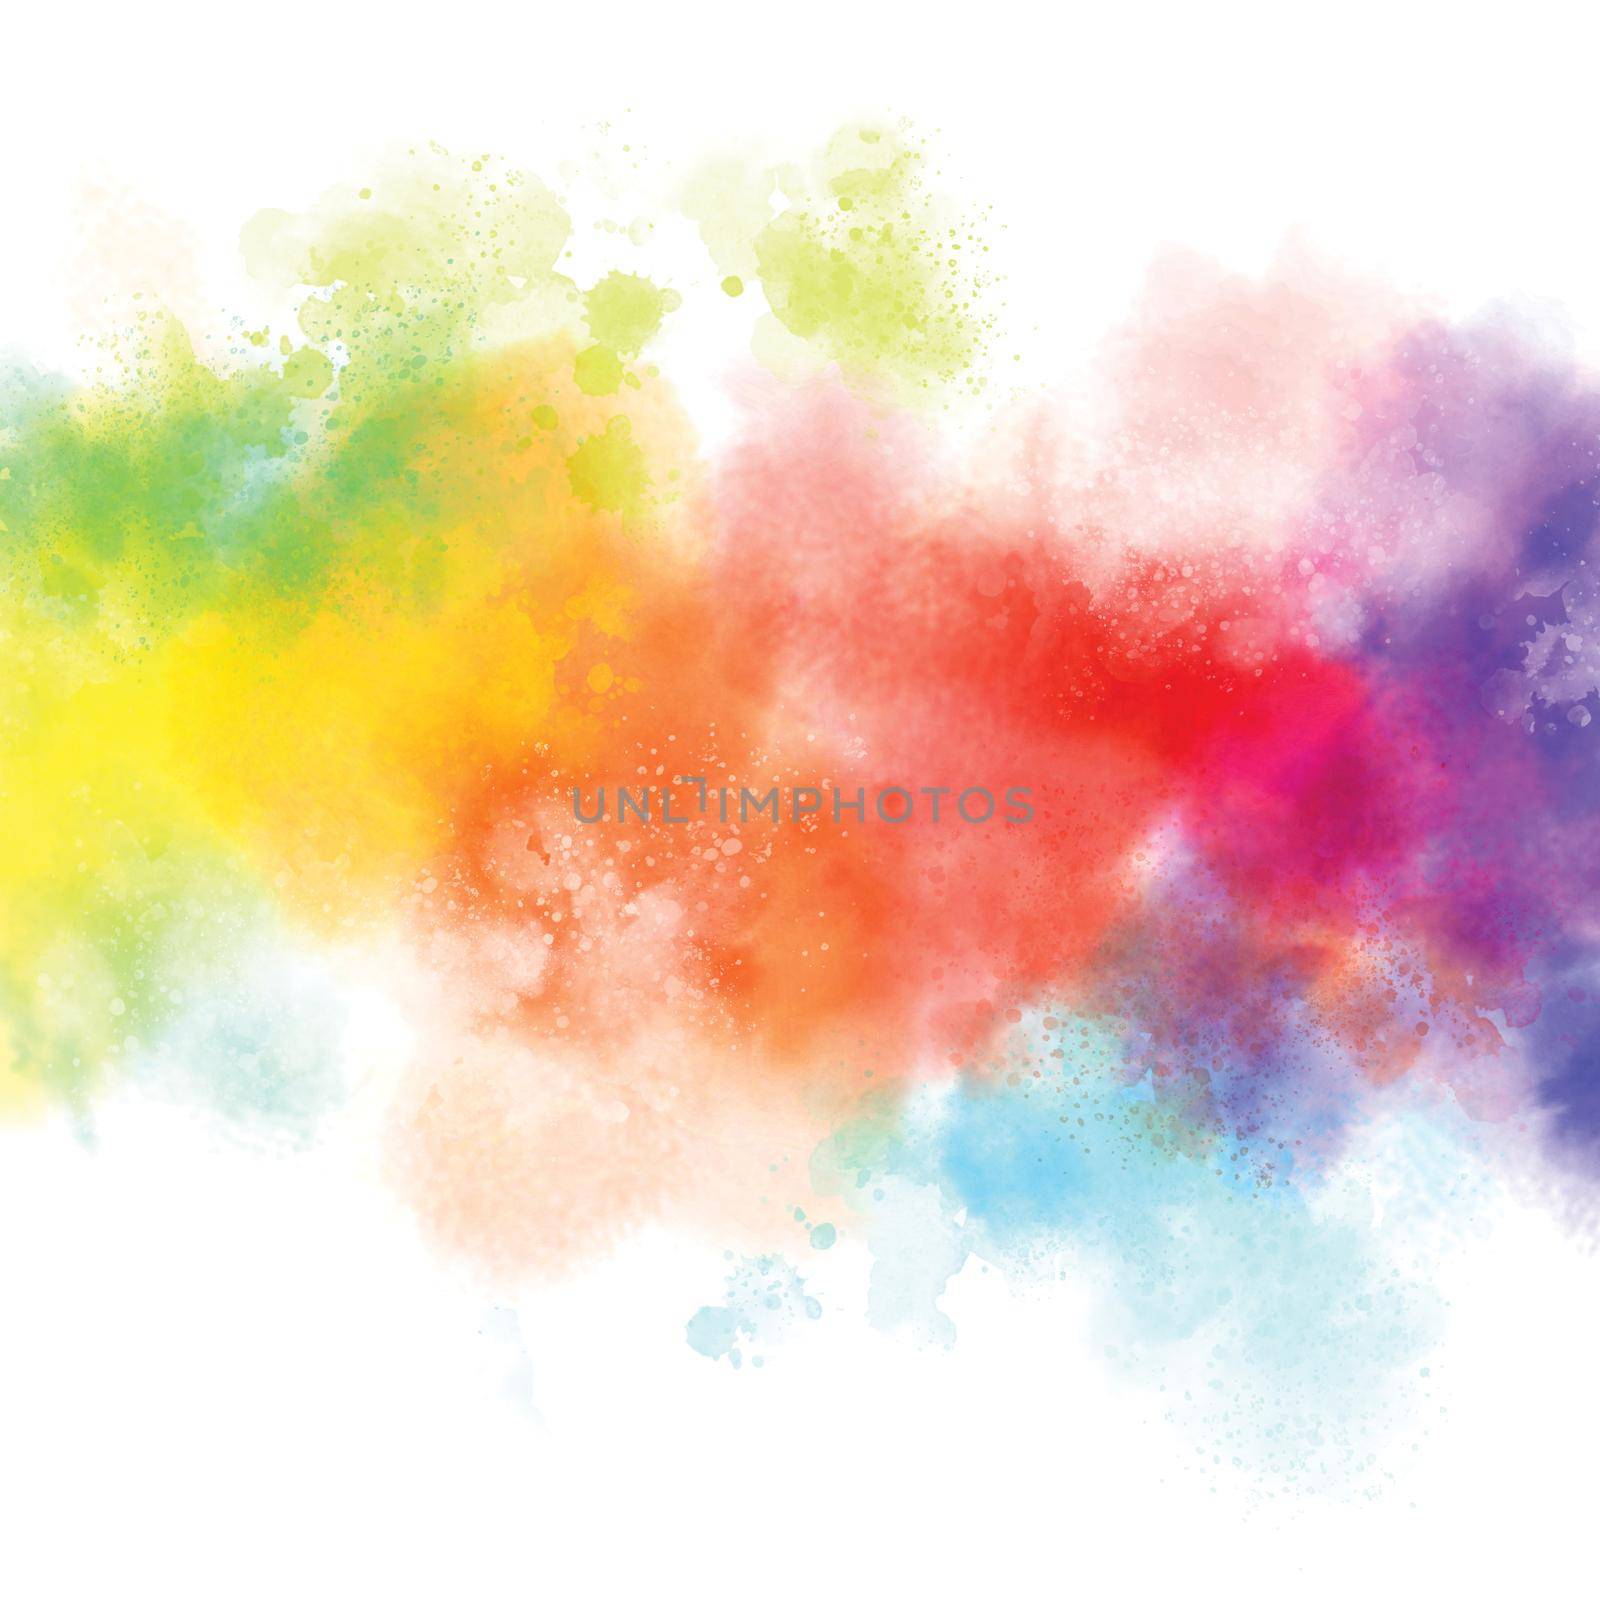 Cllorful watercolor on white background illustration